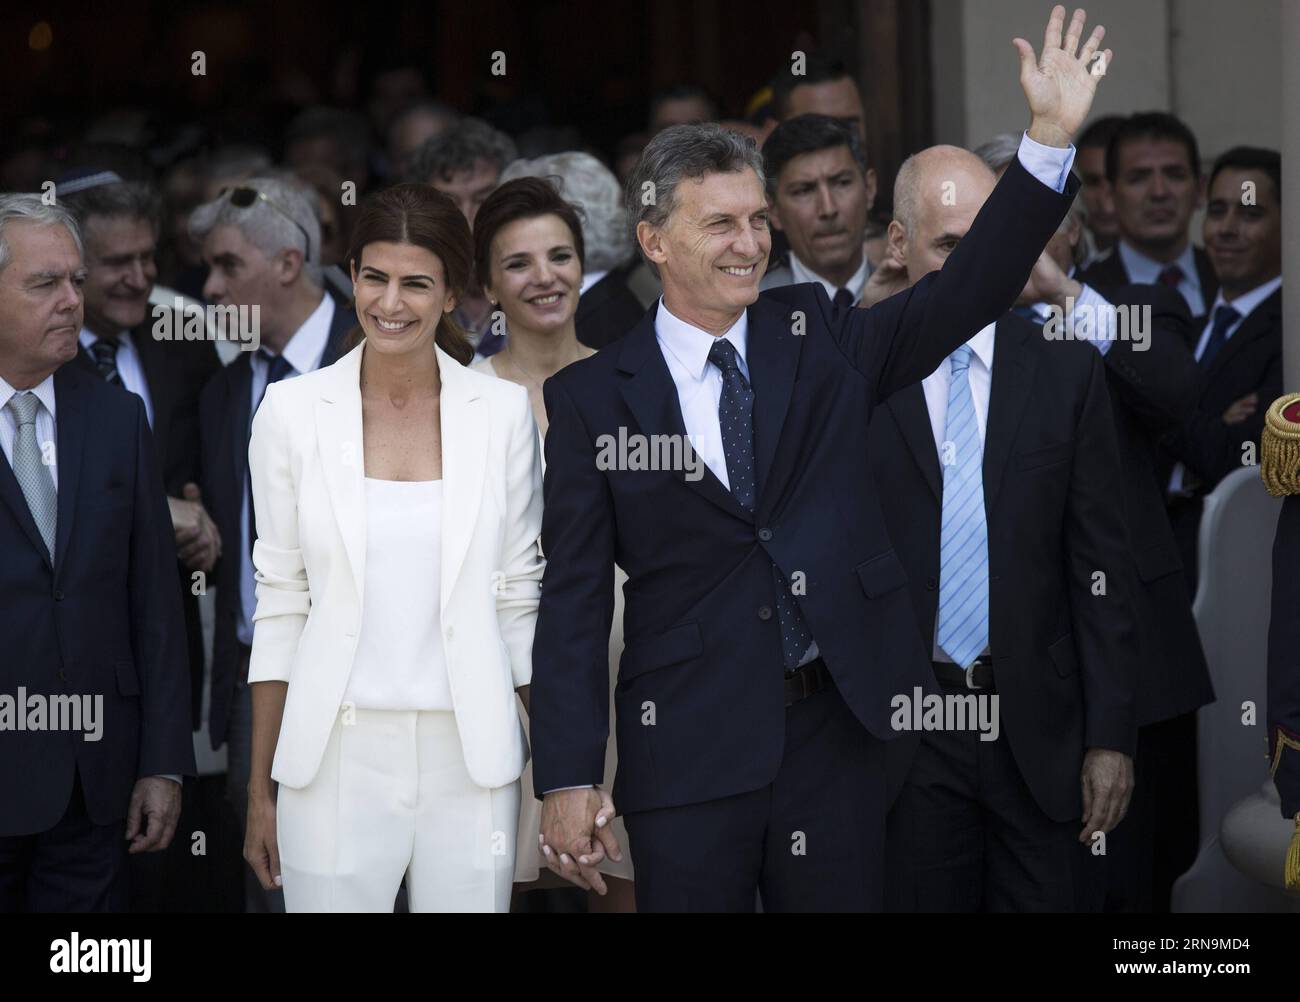 (151211) -- BUENOS AIRES, Dec. 11, 2015 -- Argentina s President Mauricio Macri (R Front) leaves with First Lady Juliana Awada (2nd L) after taking part in the Tedeum at the Metropolitan Cathedral in Buenos Aires, capital of Argentina, Dec. 11, 2015. According to local press, Mauricio Macri attended Friday with Argentina s Vice President Gabriela Michetti and his Cabinet the traditional religious service at the Metropolital Cathedral, one day after his pesidential inauguration. Martin Zabala) (jg) (fnc) ARGENTINA-BUENOS AIRES-POLITICS-PRESIDENT e MARTINxZABALA PUBLICATIONxNOTxINxCHN   151211 B Stock Photo